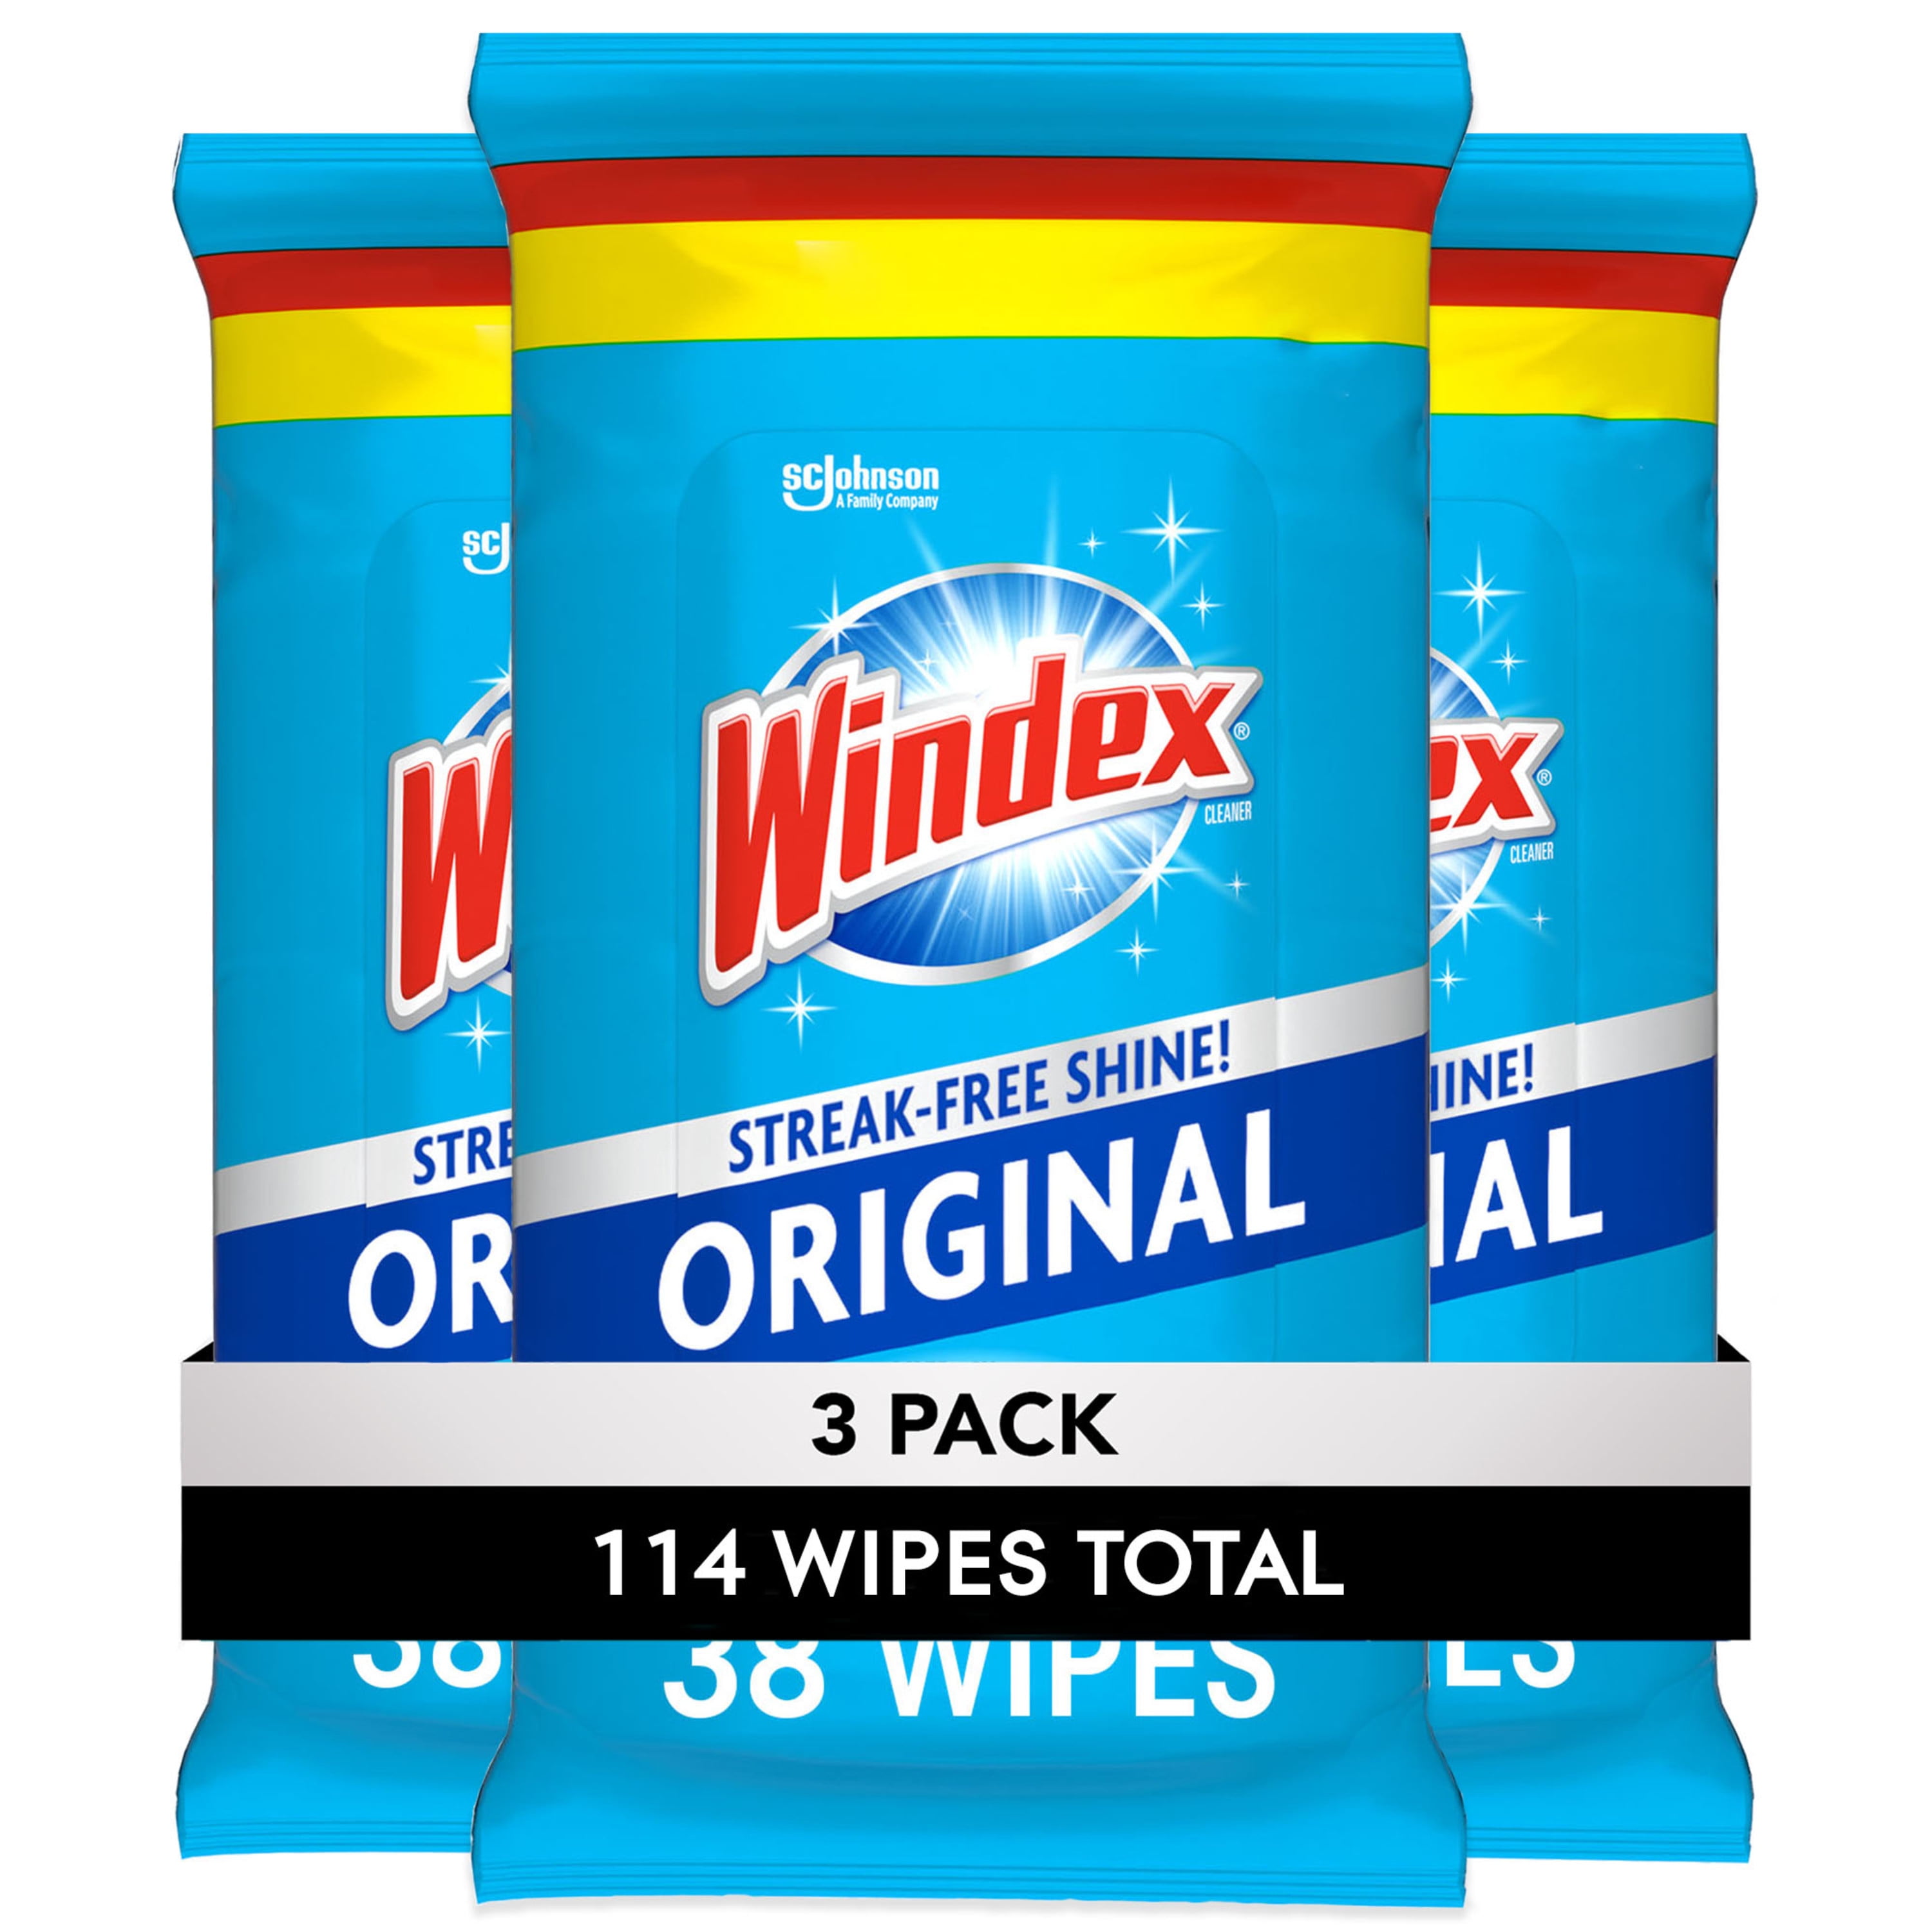 WINDEX Glass Cleaner Wipes: Wipes, Packet, Unscented, 12 PK